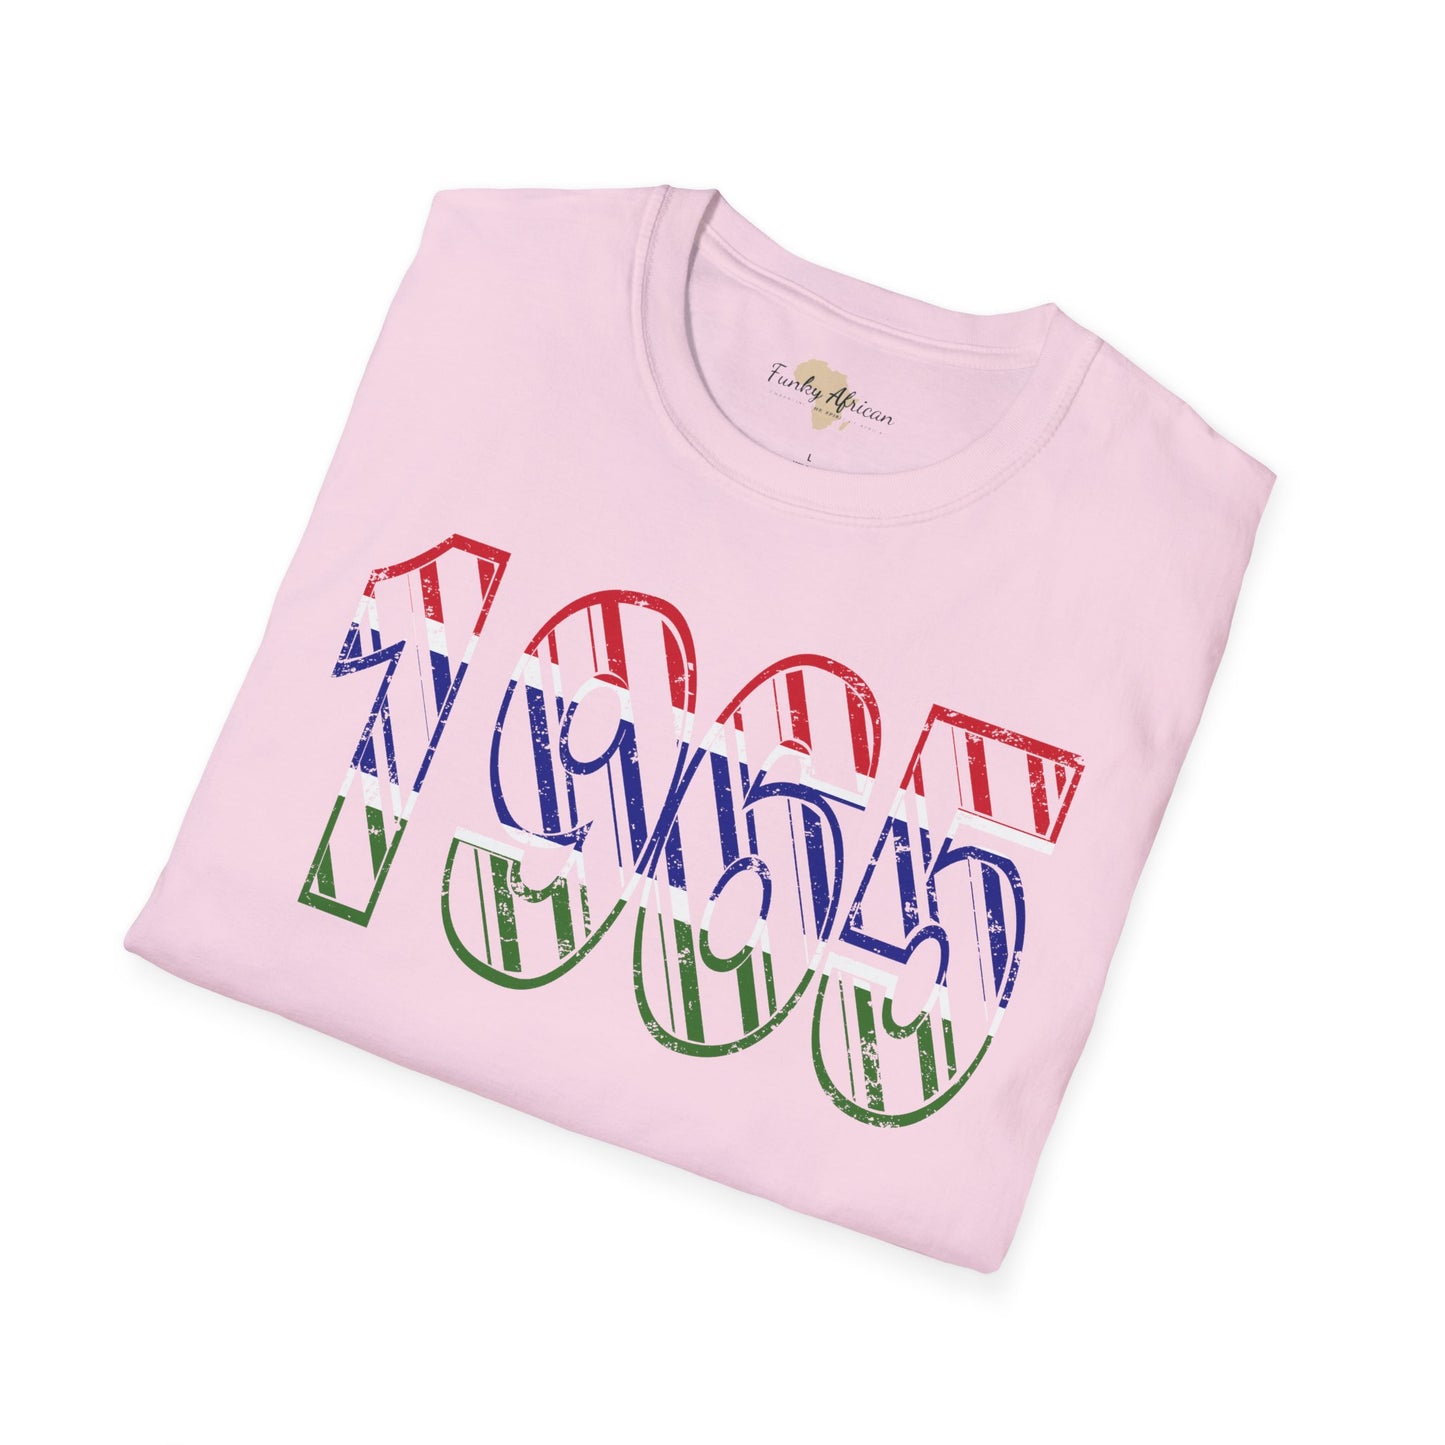 Gambia year unisex softstyle tee